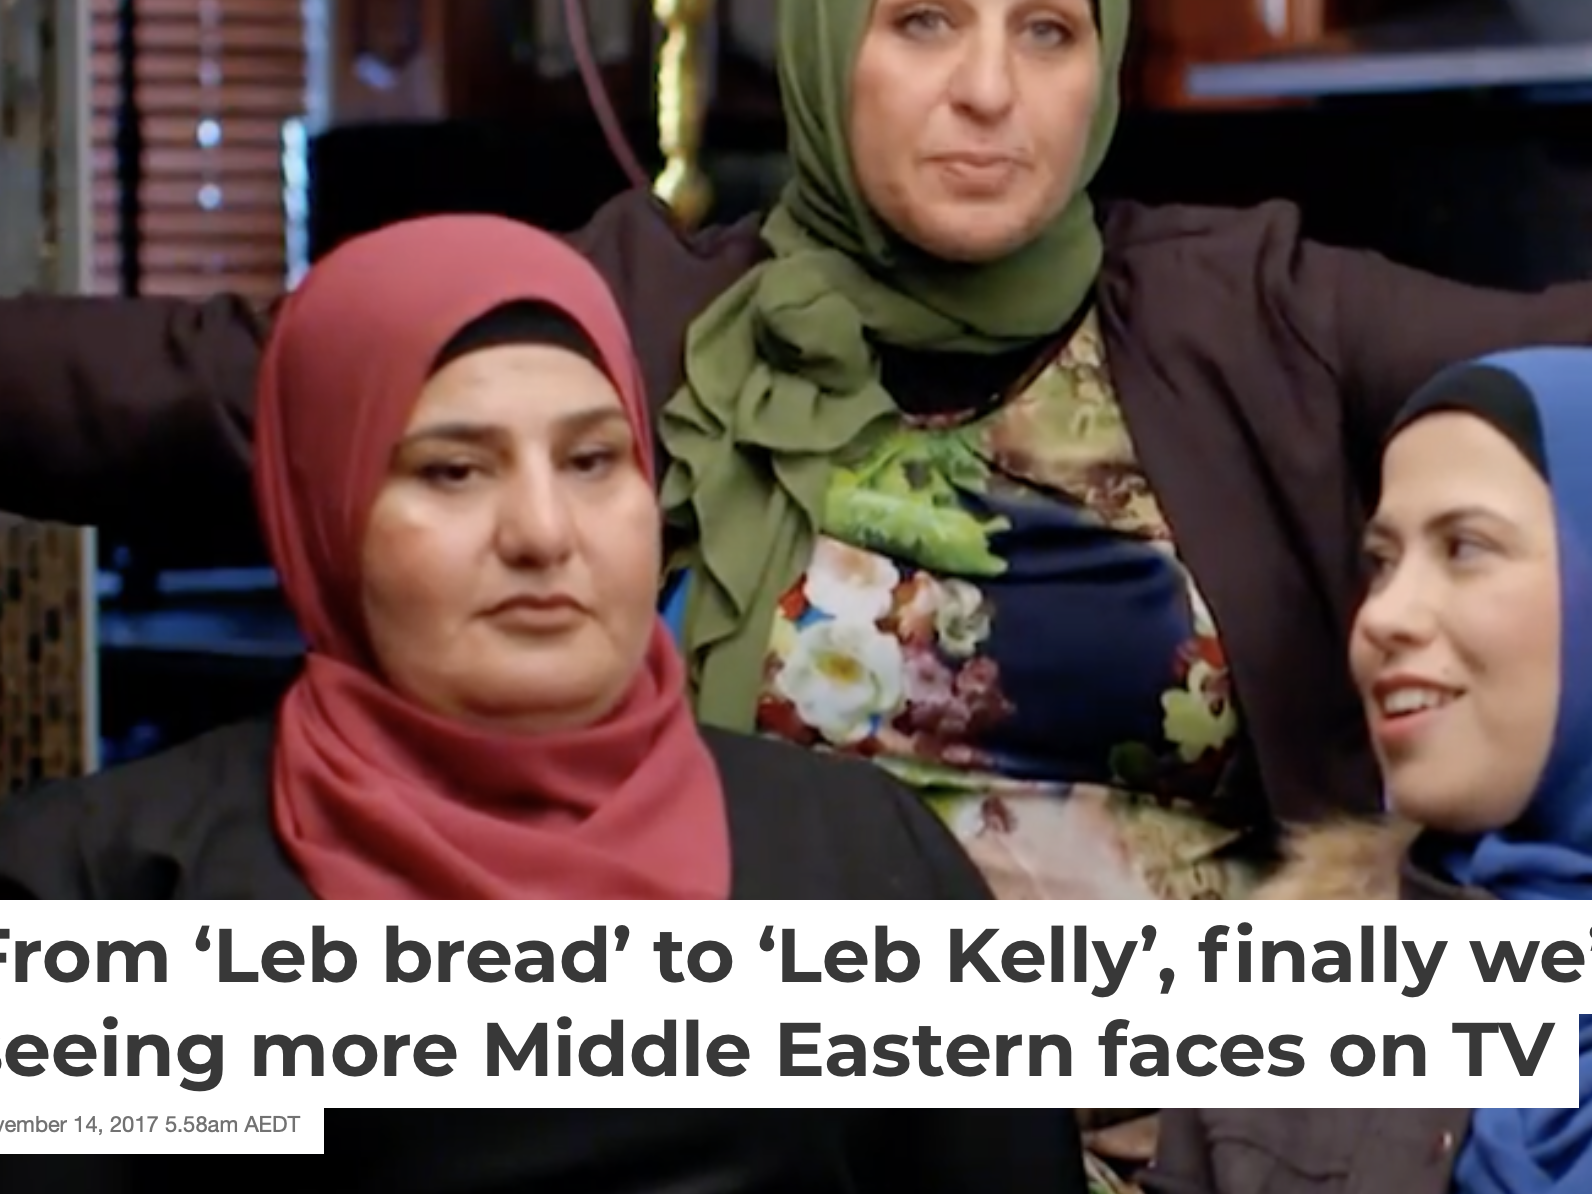 From 'Leb bread' to 'Leb Kelly'